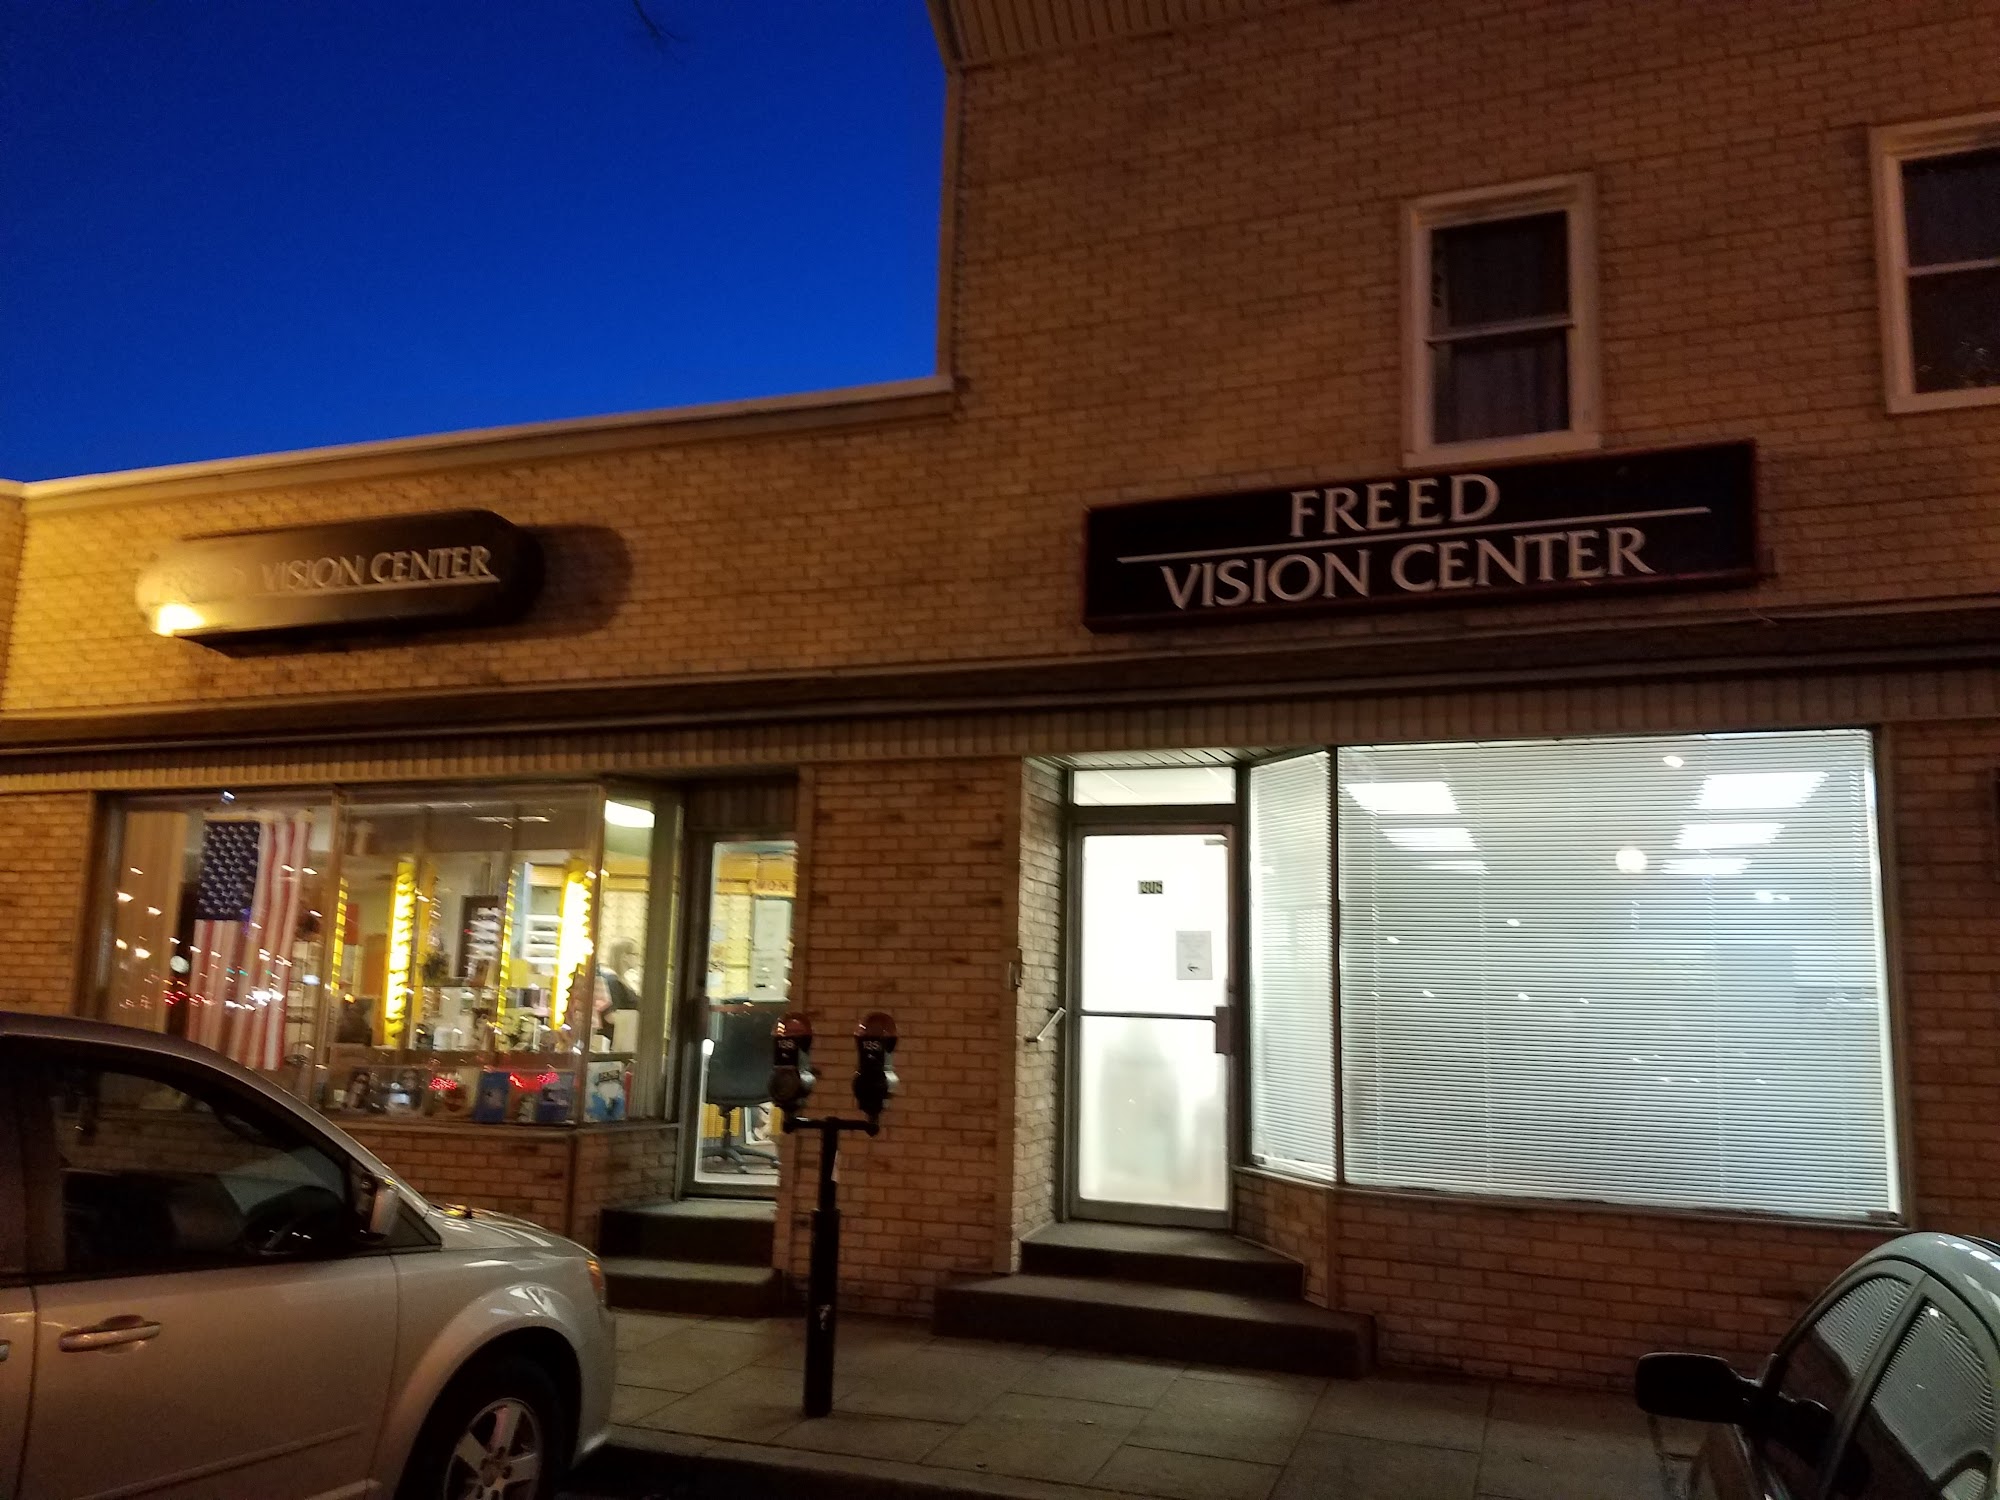 Freed Vision Center 1301 Paterson Plank Rd, Secaucus New Jersey 07094